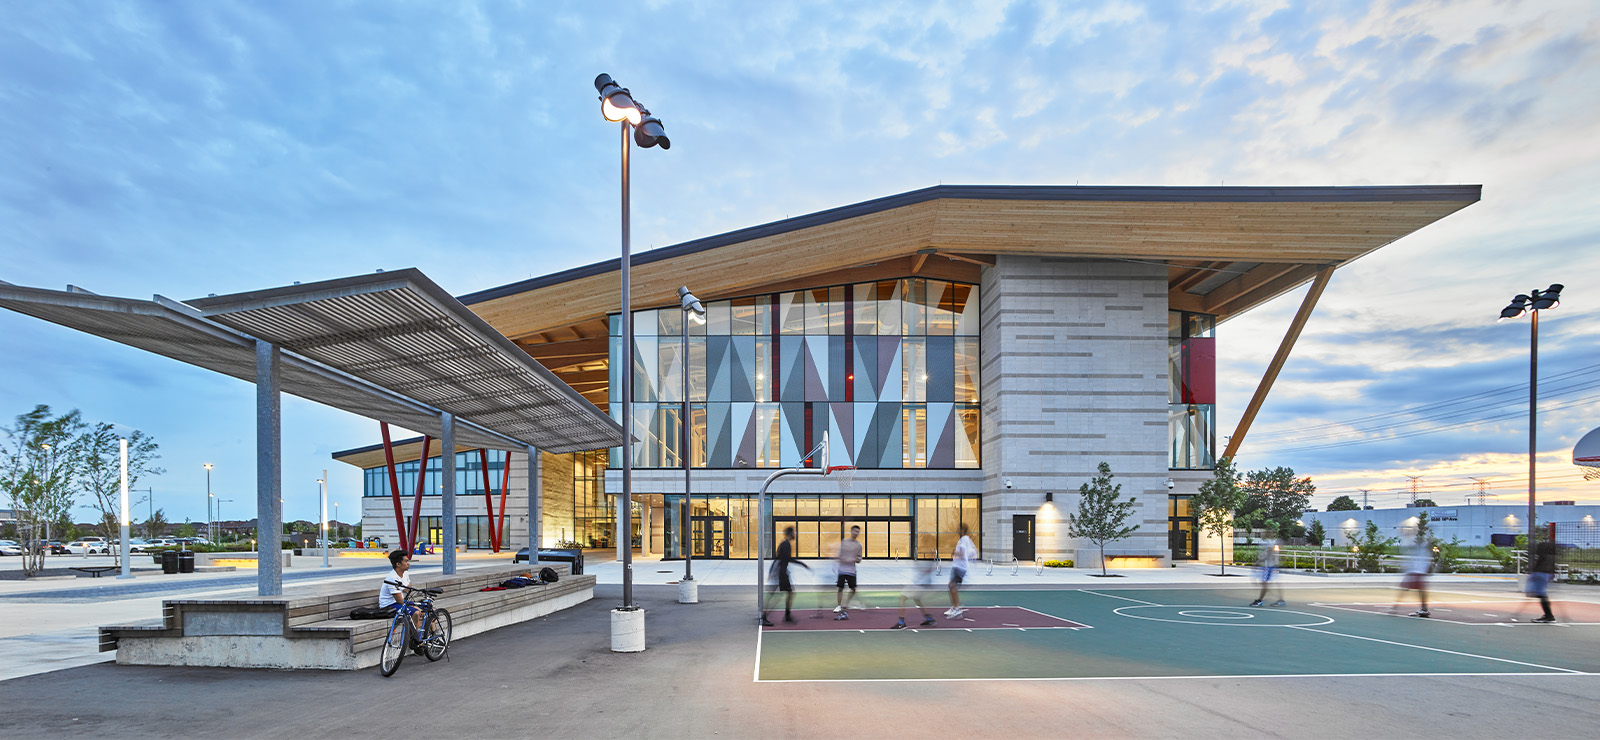 Aaniin Community Centre recognized in Markham Urban Design Excellence Awards